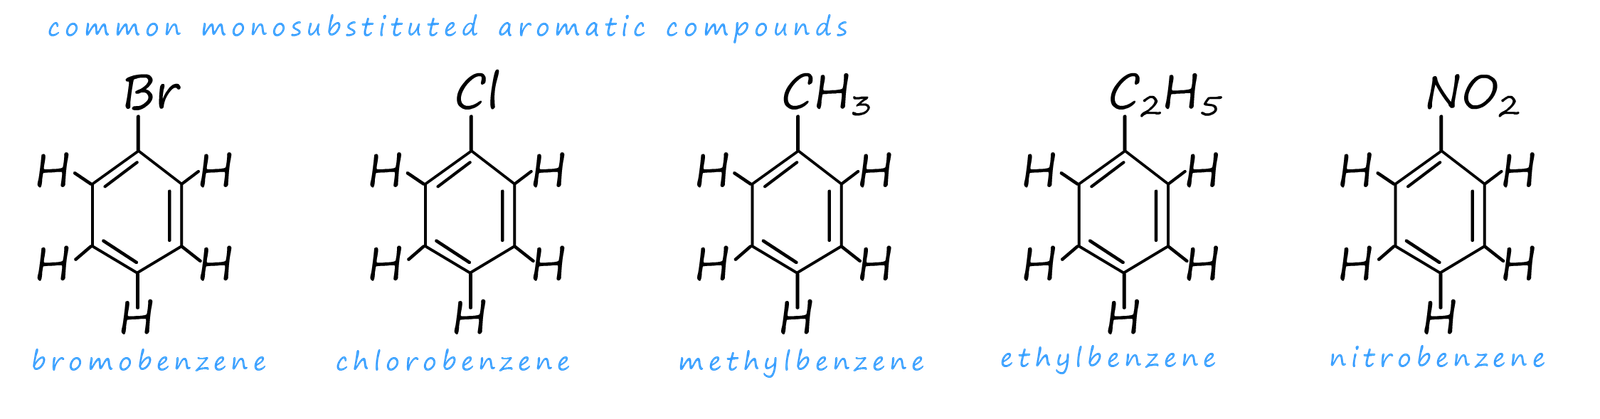 common monsubstituted aromatic compounds